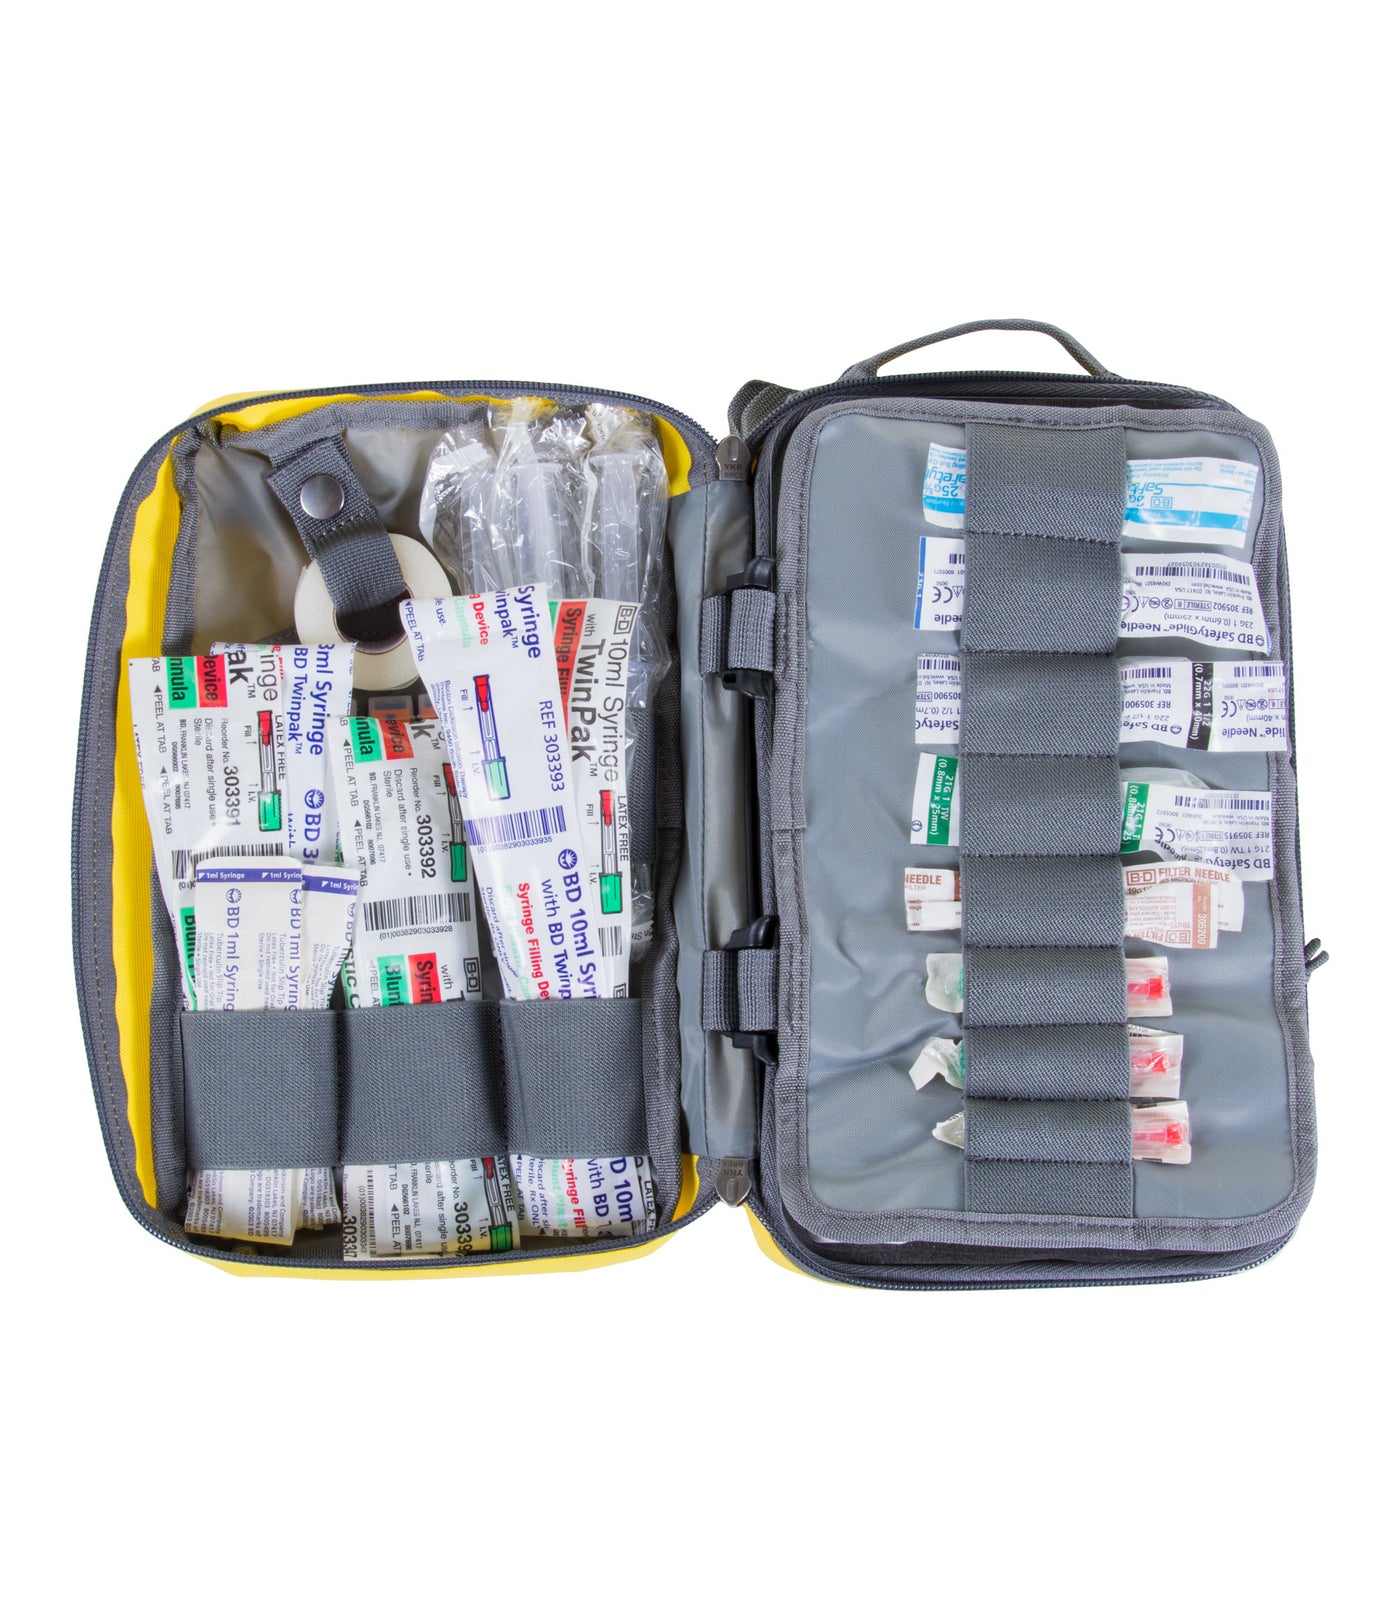 Loaded Medication Kit in Yellow